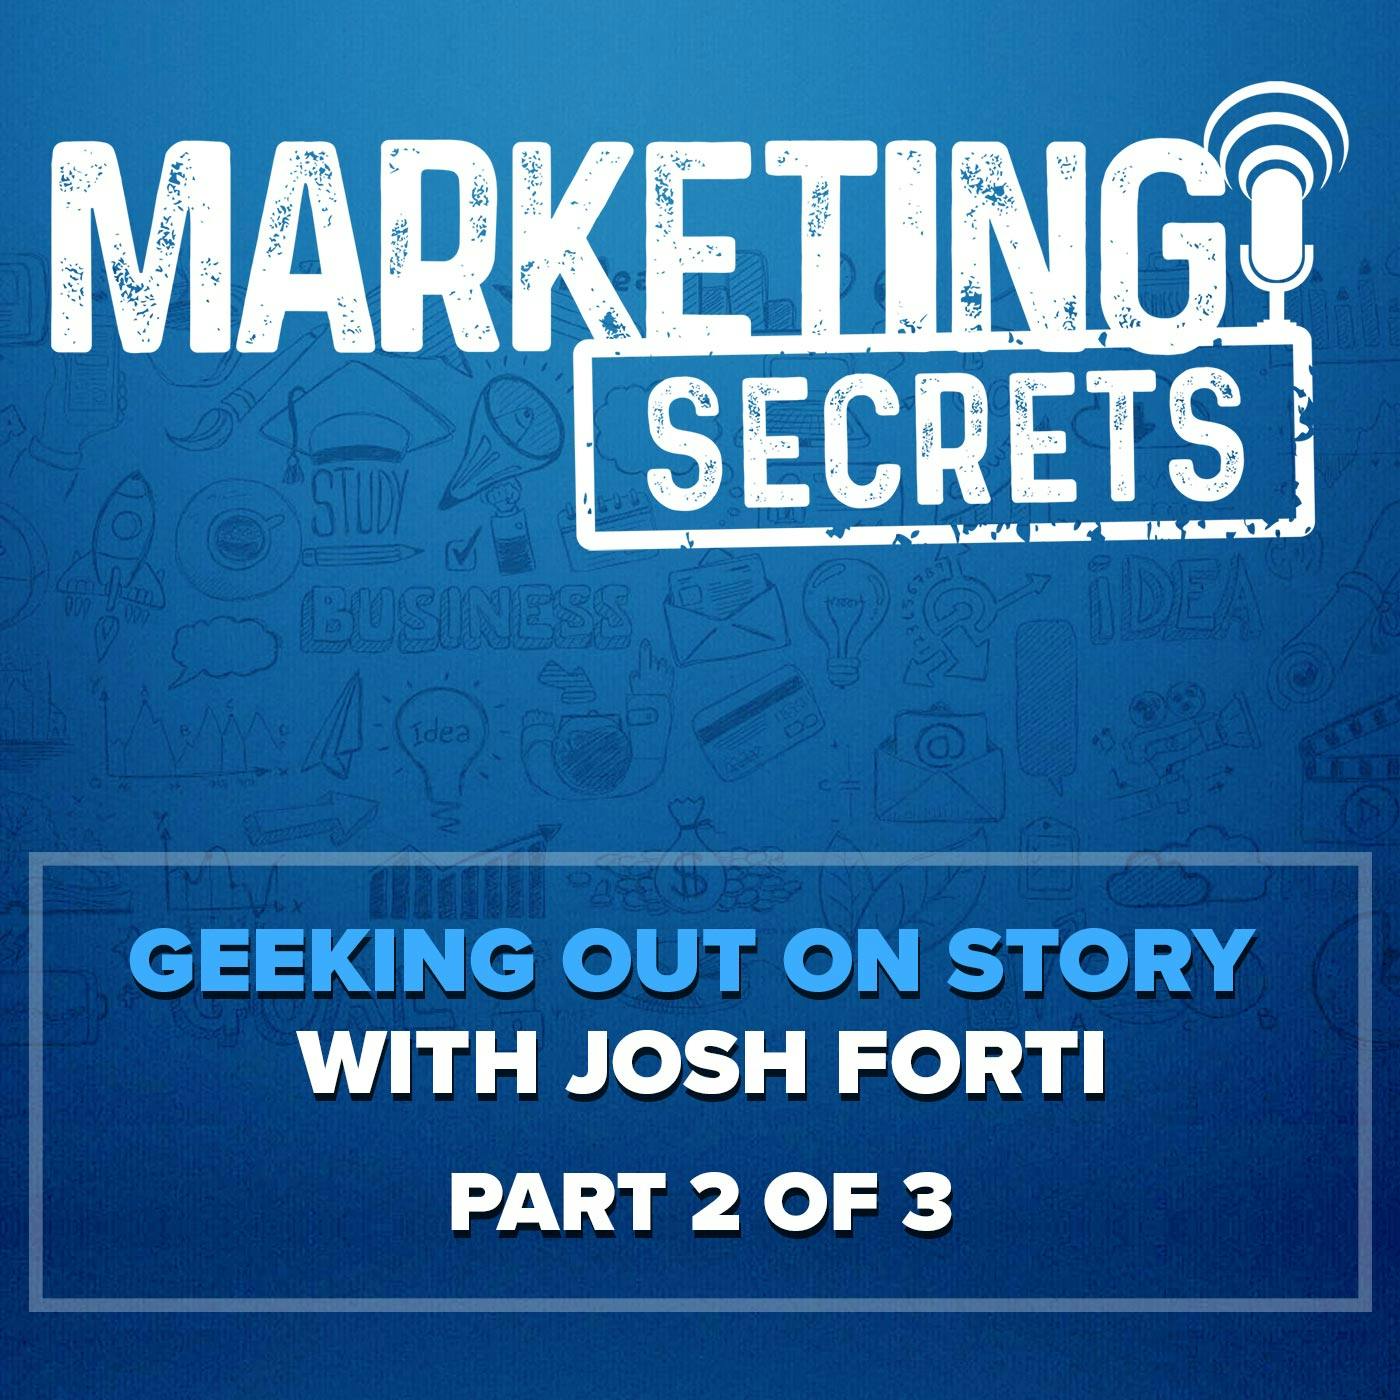 Geeking Out on Story with Josh Forti, Part 2